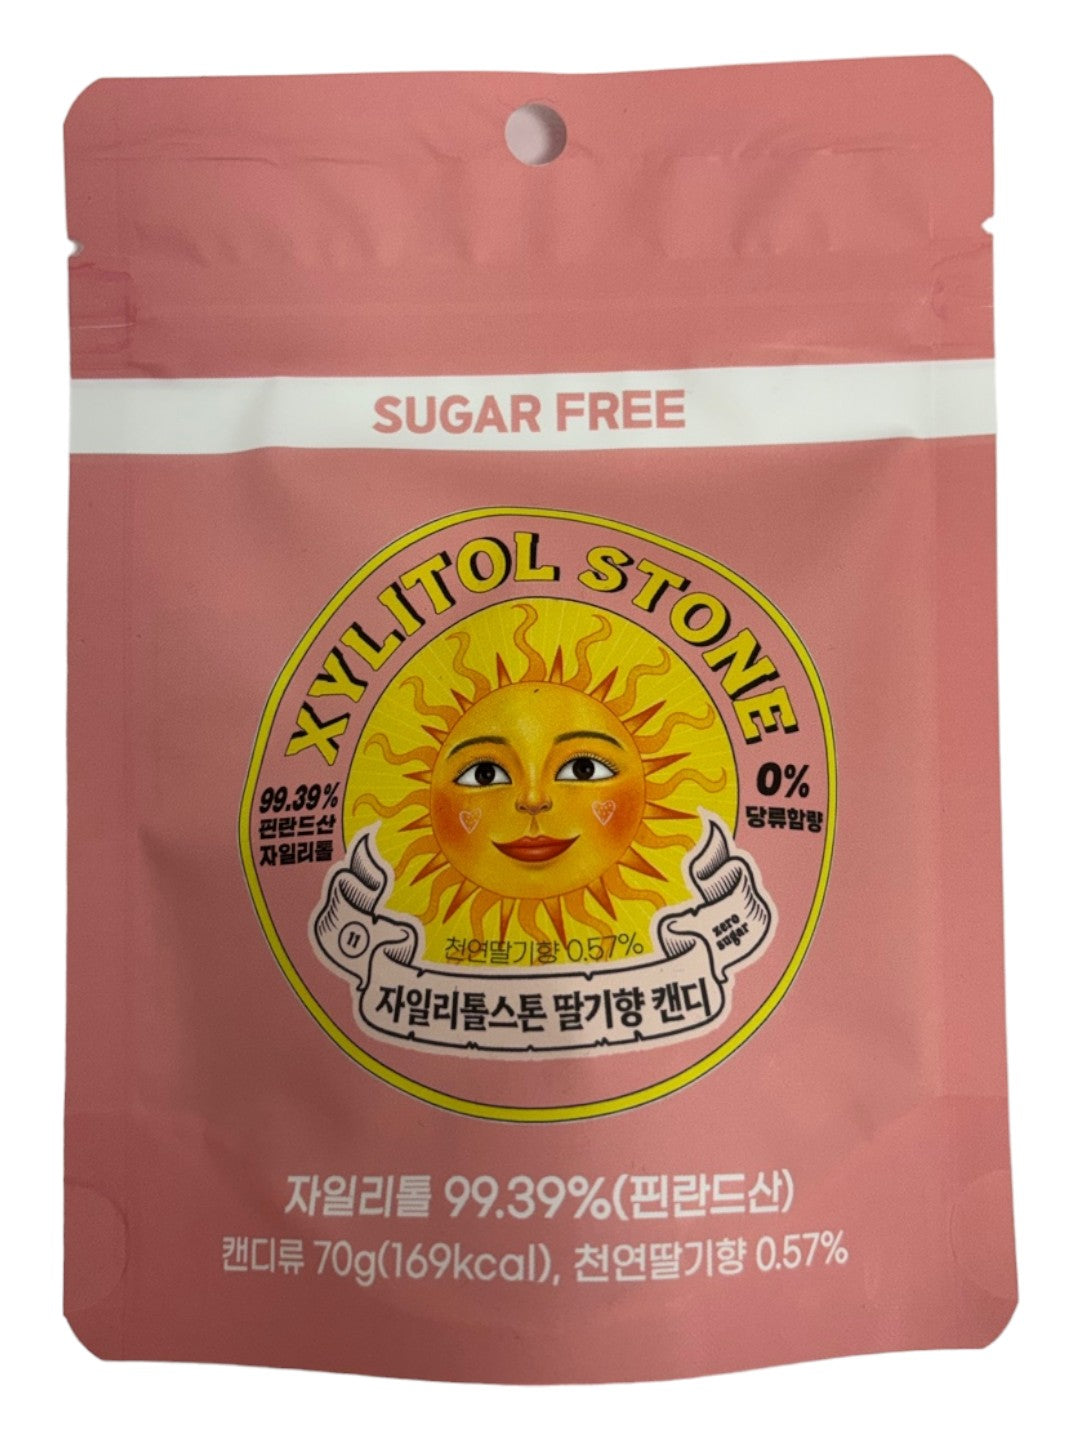 Xylitol Stone Sugar Free Candy 70G Resealable Pouch, Strawberry